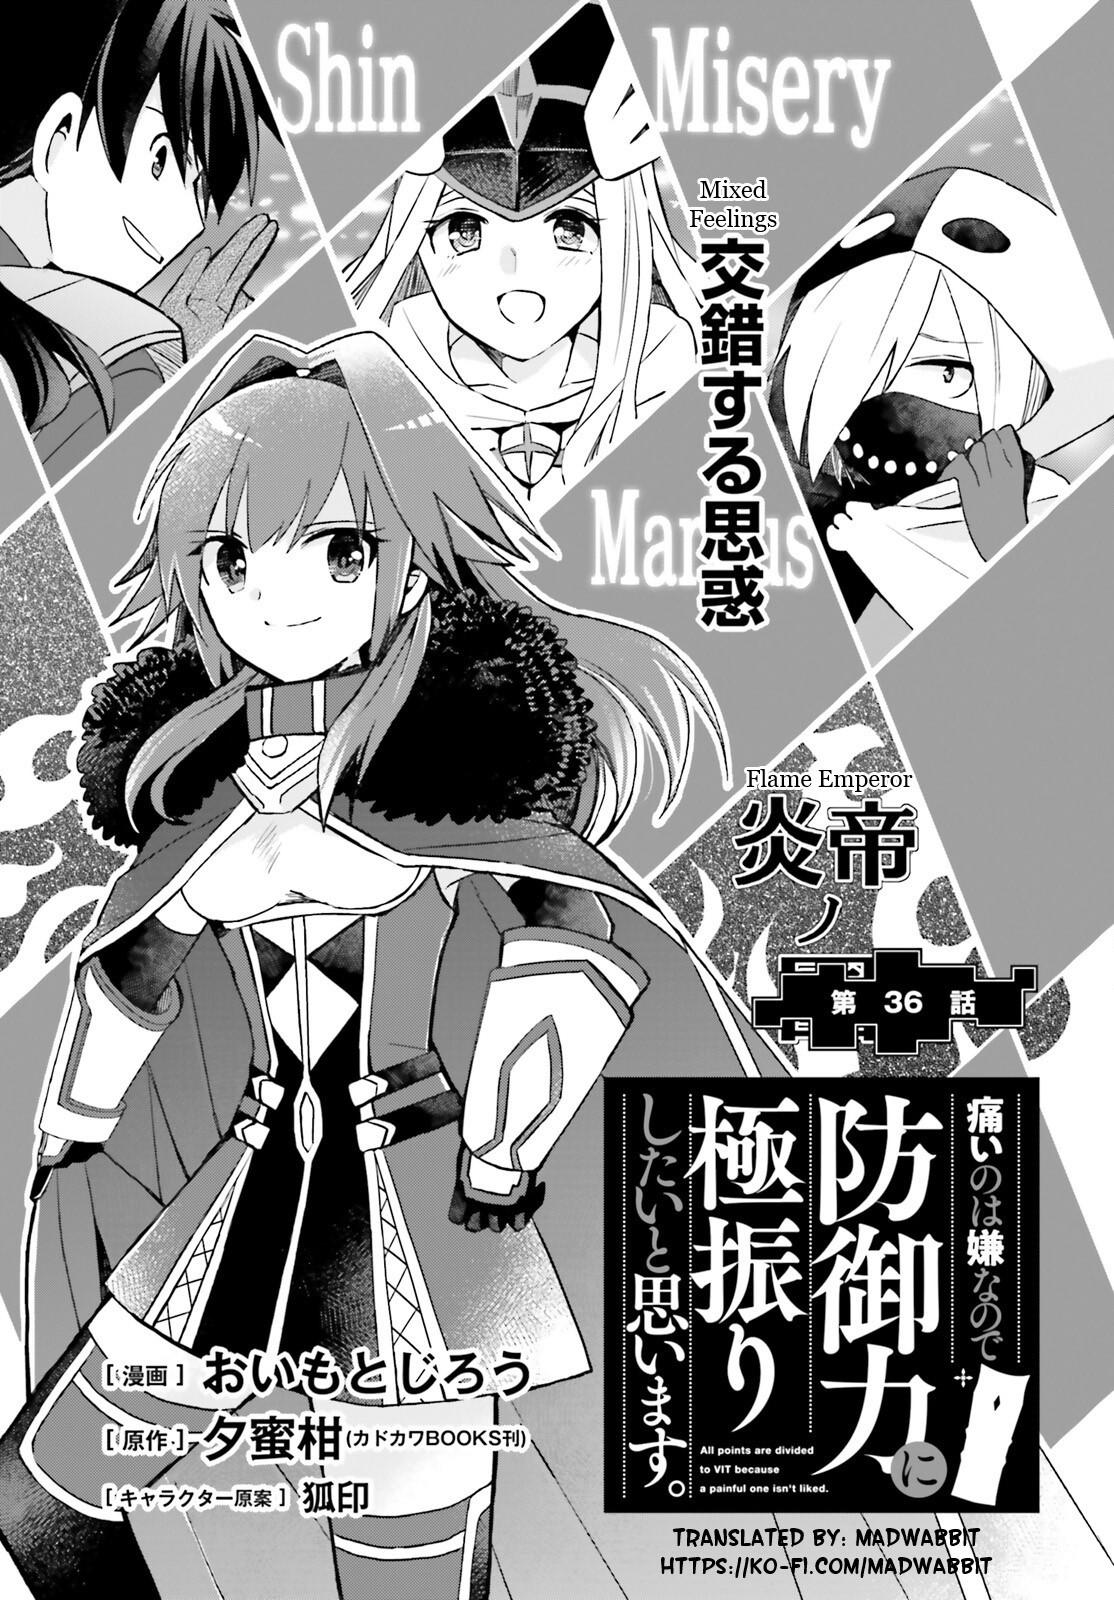 The World of Otome Games is Tough For Mobs Manga - Chapter 36